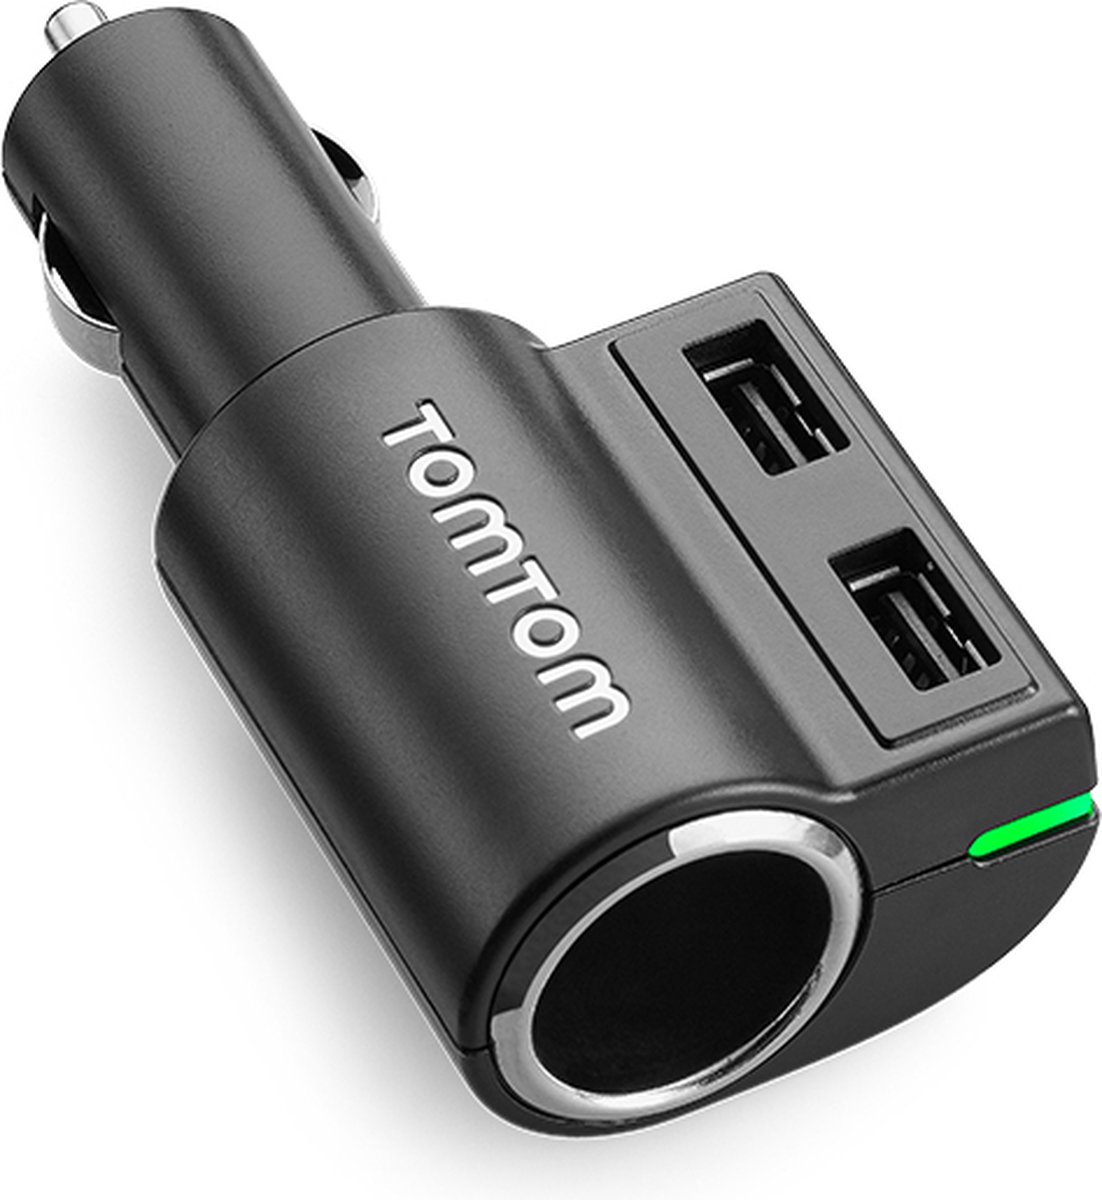 TomTom Fast USB Multi-charger - TomTom